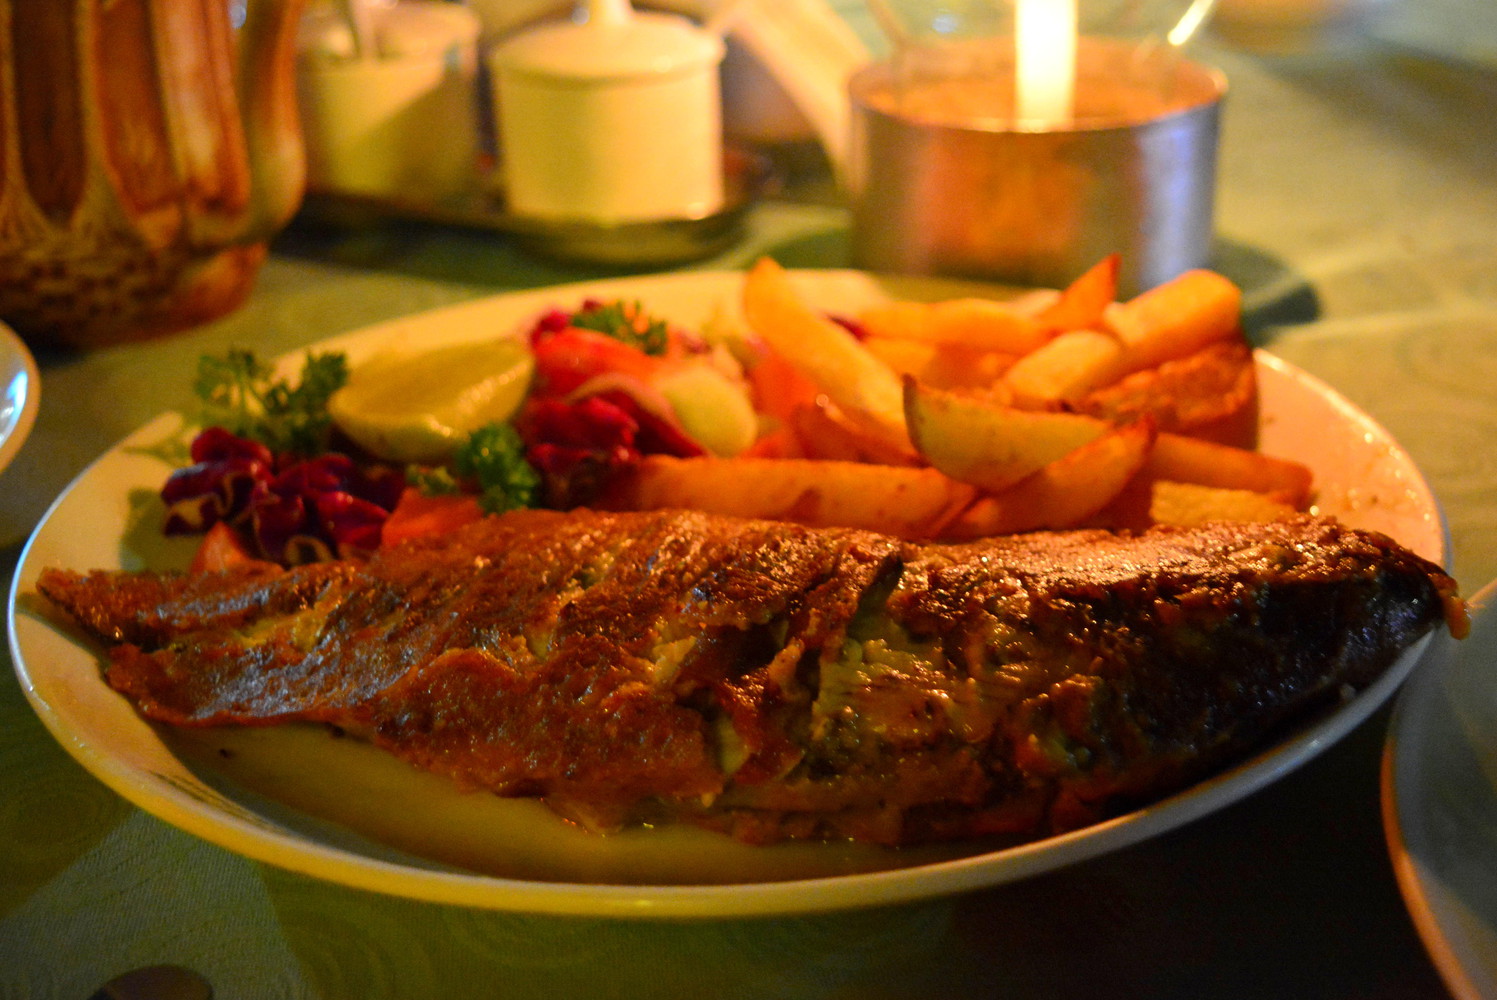 Masala fried red snapper served with fries, salad, and a lemon slice